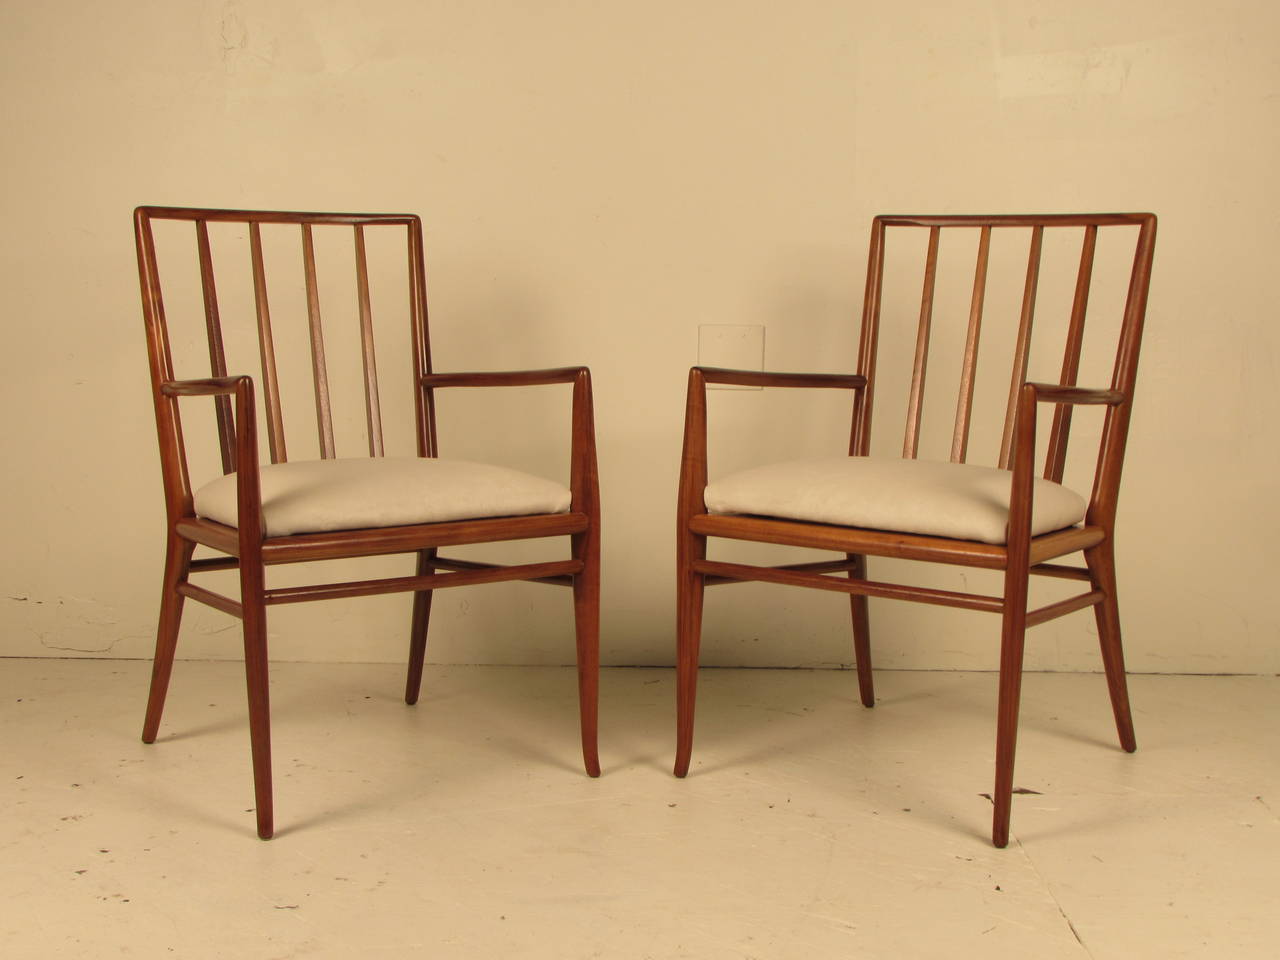 Sculptural armchairs by T.H. Robsjohn-Gibbings. These chairs can be used as occasional chairs or coupled with the matching side chairs as a dining set. They have been fully restored and are in glowing condition.